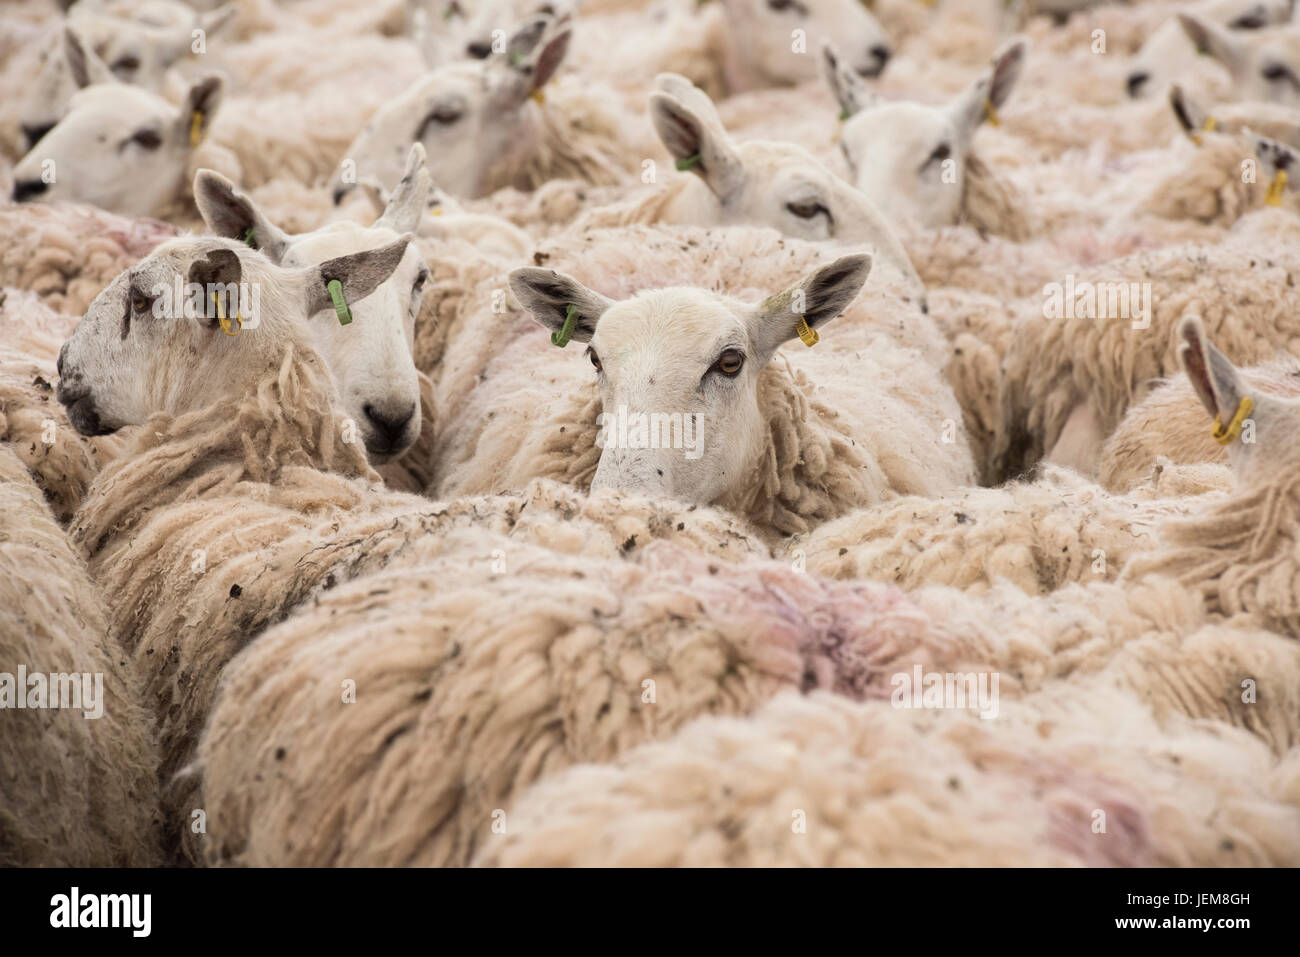 Ovis aries. Flock of Sheep in a pen waiting for shearing at an Agricultural show. UK Stock Photo